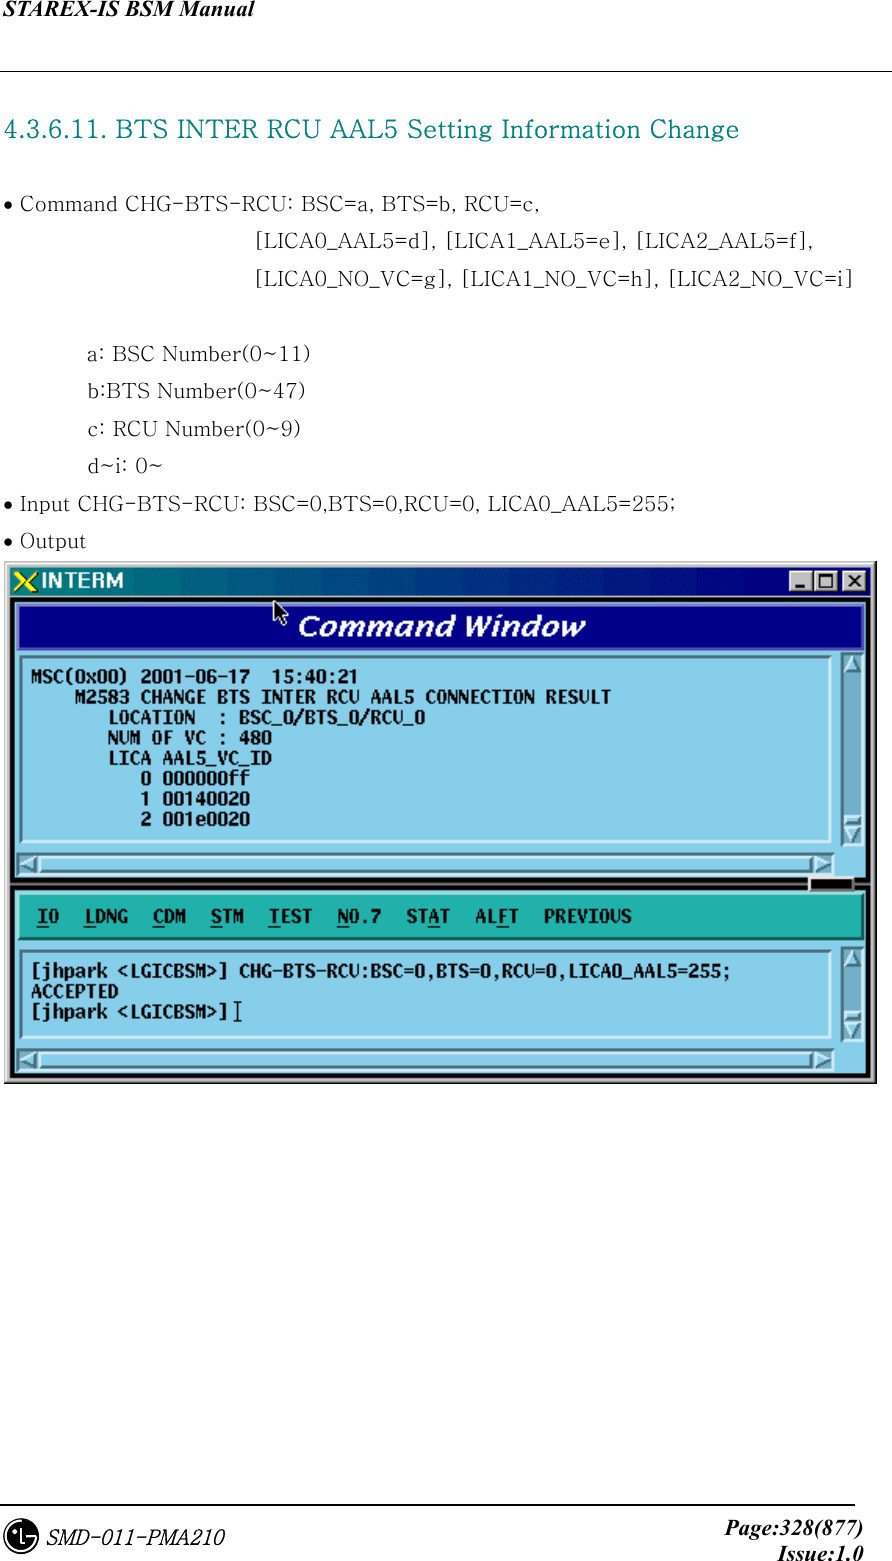 STAREX-IS BSM Manual     Page:328(877)Issue:1.0SMD-011-PMA210  4.3.6.11. BTS INTER RCU AAL5 Setting Information Change  • Command CHG-BTS-RCU: BSC=a, BTS=b, RCU=c,   [LICA0_AAL5=d], [LICA1_AAL5=e], [LICA2_AAL5=f],         [LICA0_NO_VC=g], [LICA1_NO_VC=h], [LICA2_NO_VC=i]  a: BSC Number(0~11)         b:BTS Number(0~47)         c: RCU Number(0~9)         d~i: 0~ • Input CHG-BTS-RCU: BSC=0,BTS=0,RCU=0, LICA0_AAL5=255; • Output    